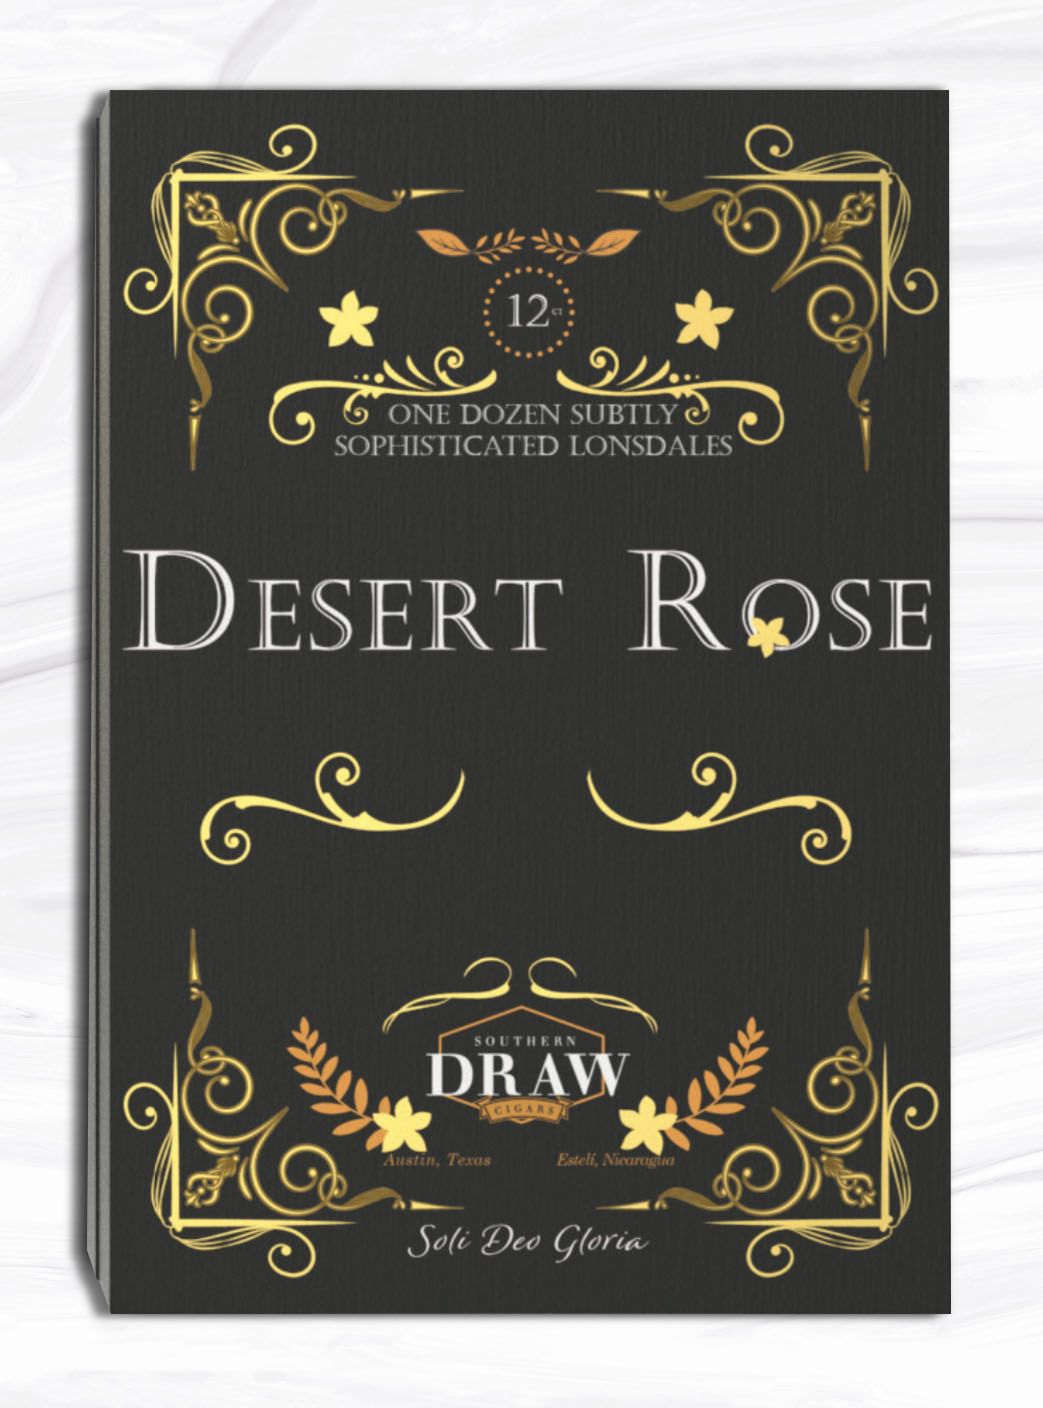 Cigar News: Southern Draw Cigars Expands Desert Rose with Lonsdale and Toro Offerings.